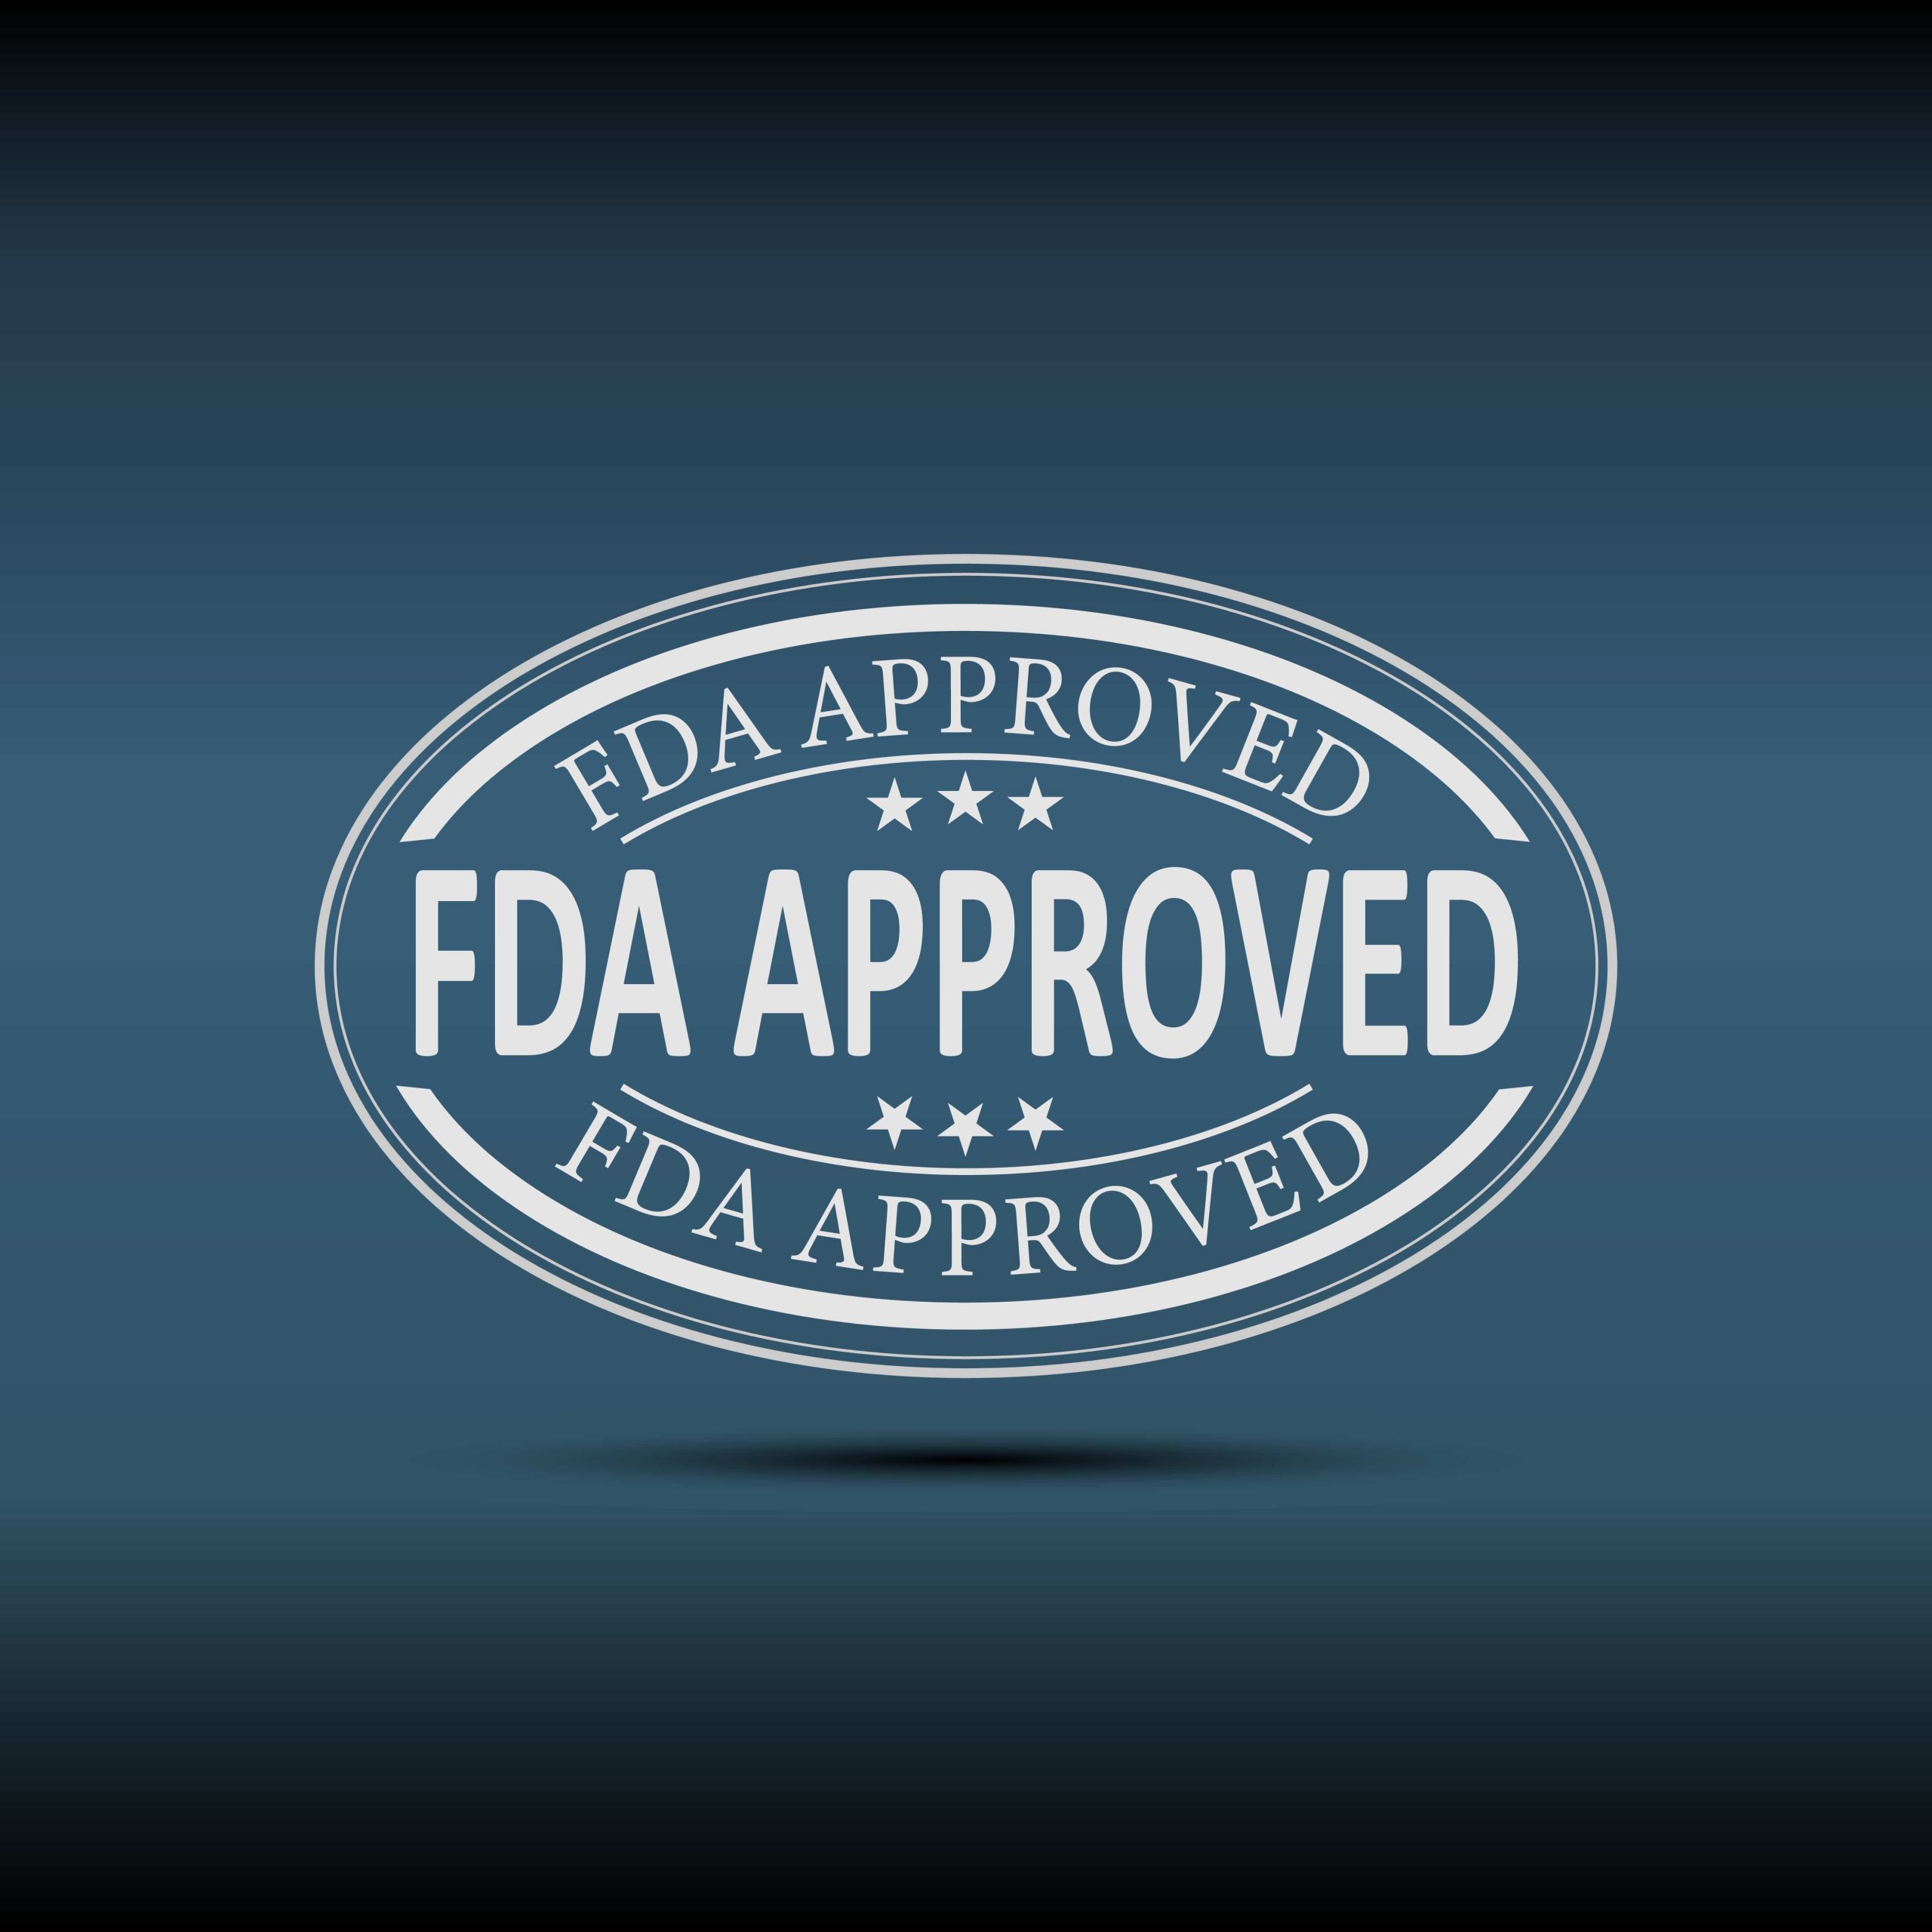 FDA Approves IQOS as “Modified Risk Tobaccoo Product”, Despite No Evidence to Back It Up